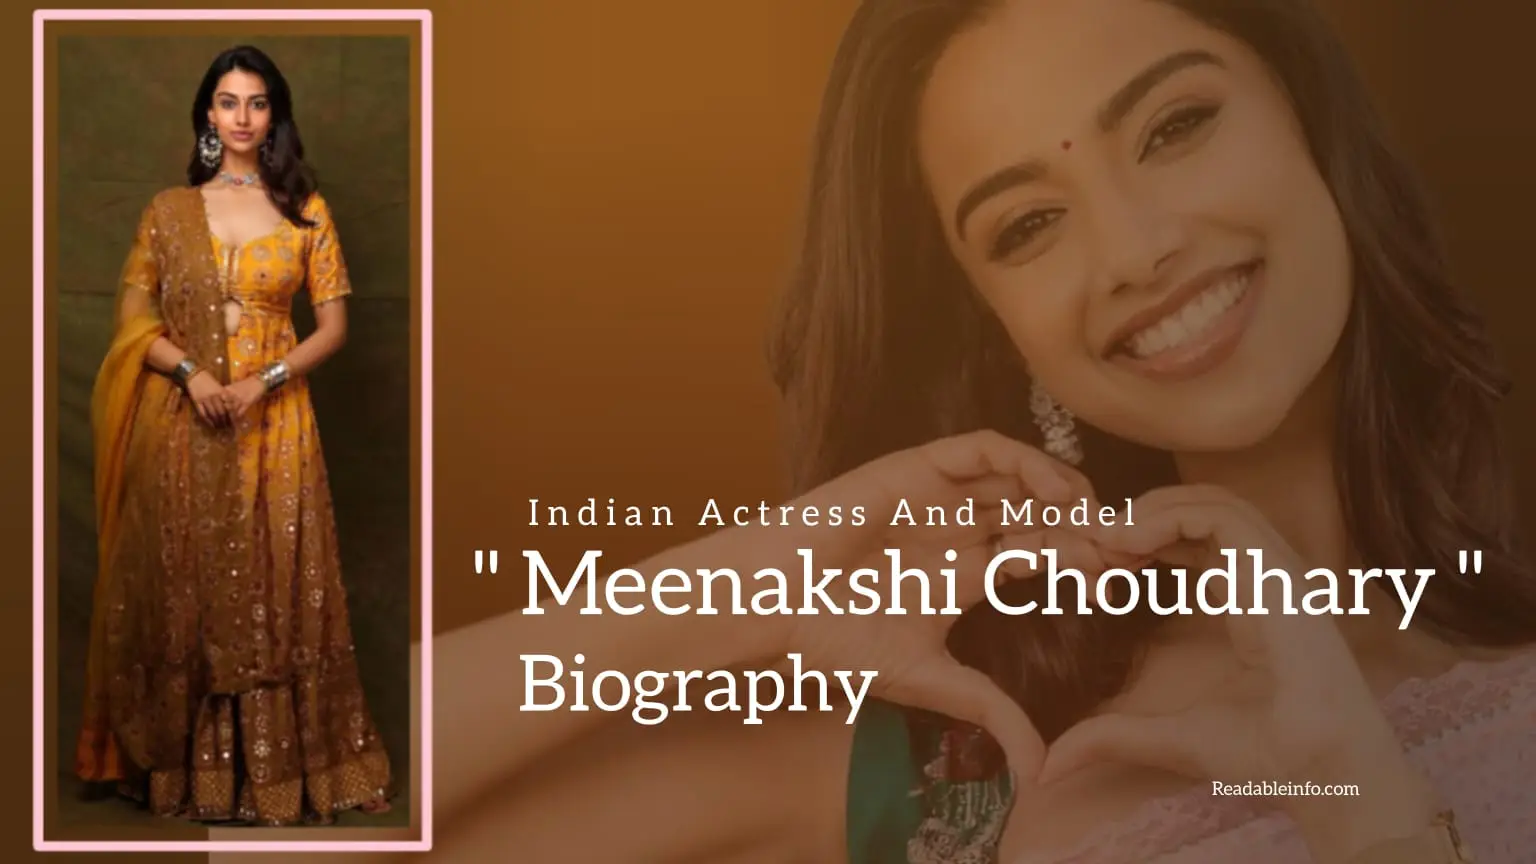 You are currently viewing Meenakshi Chaudhary Biography (Indian Actress and Model)